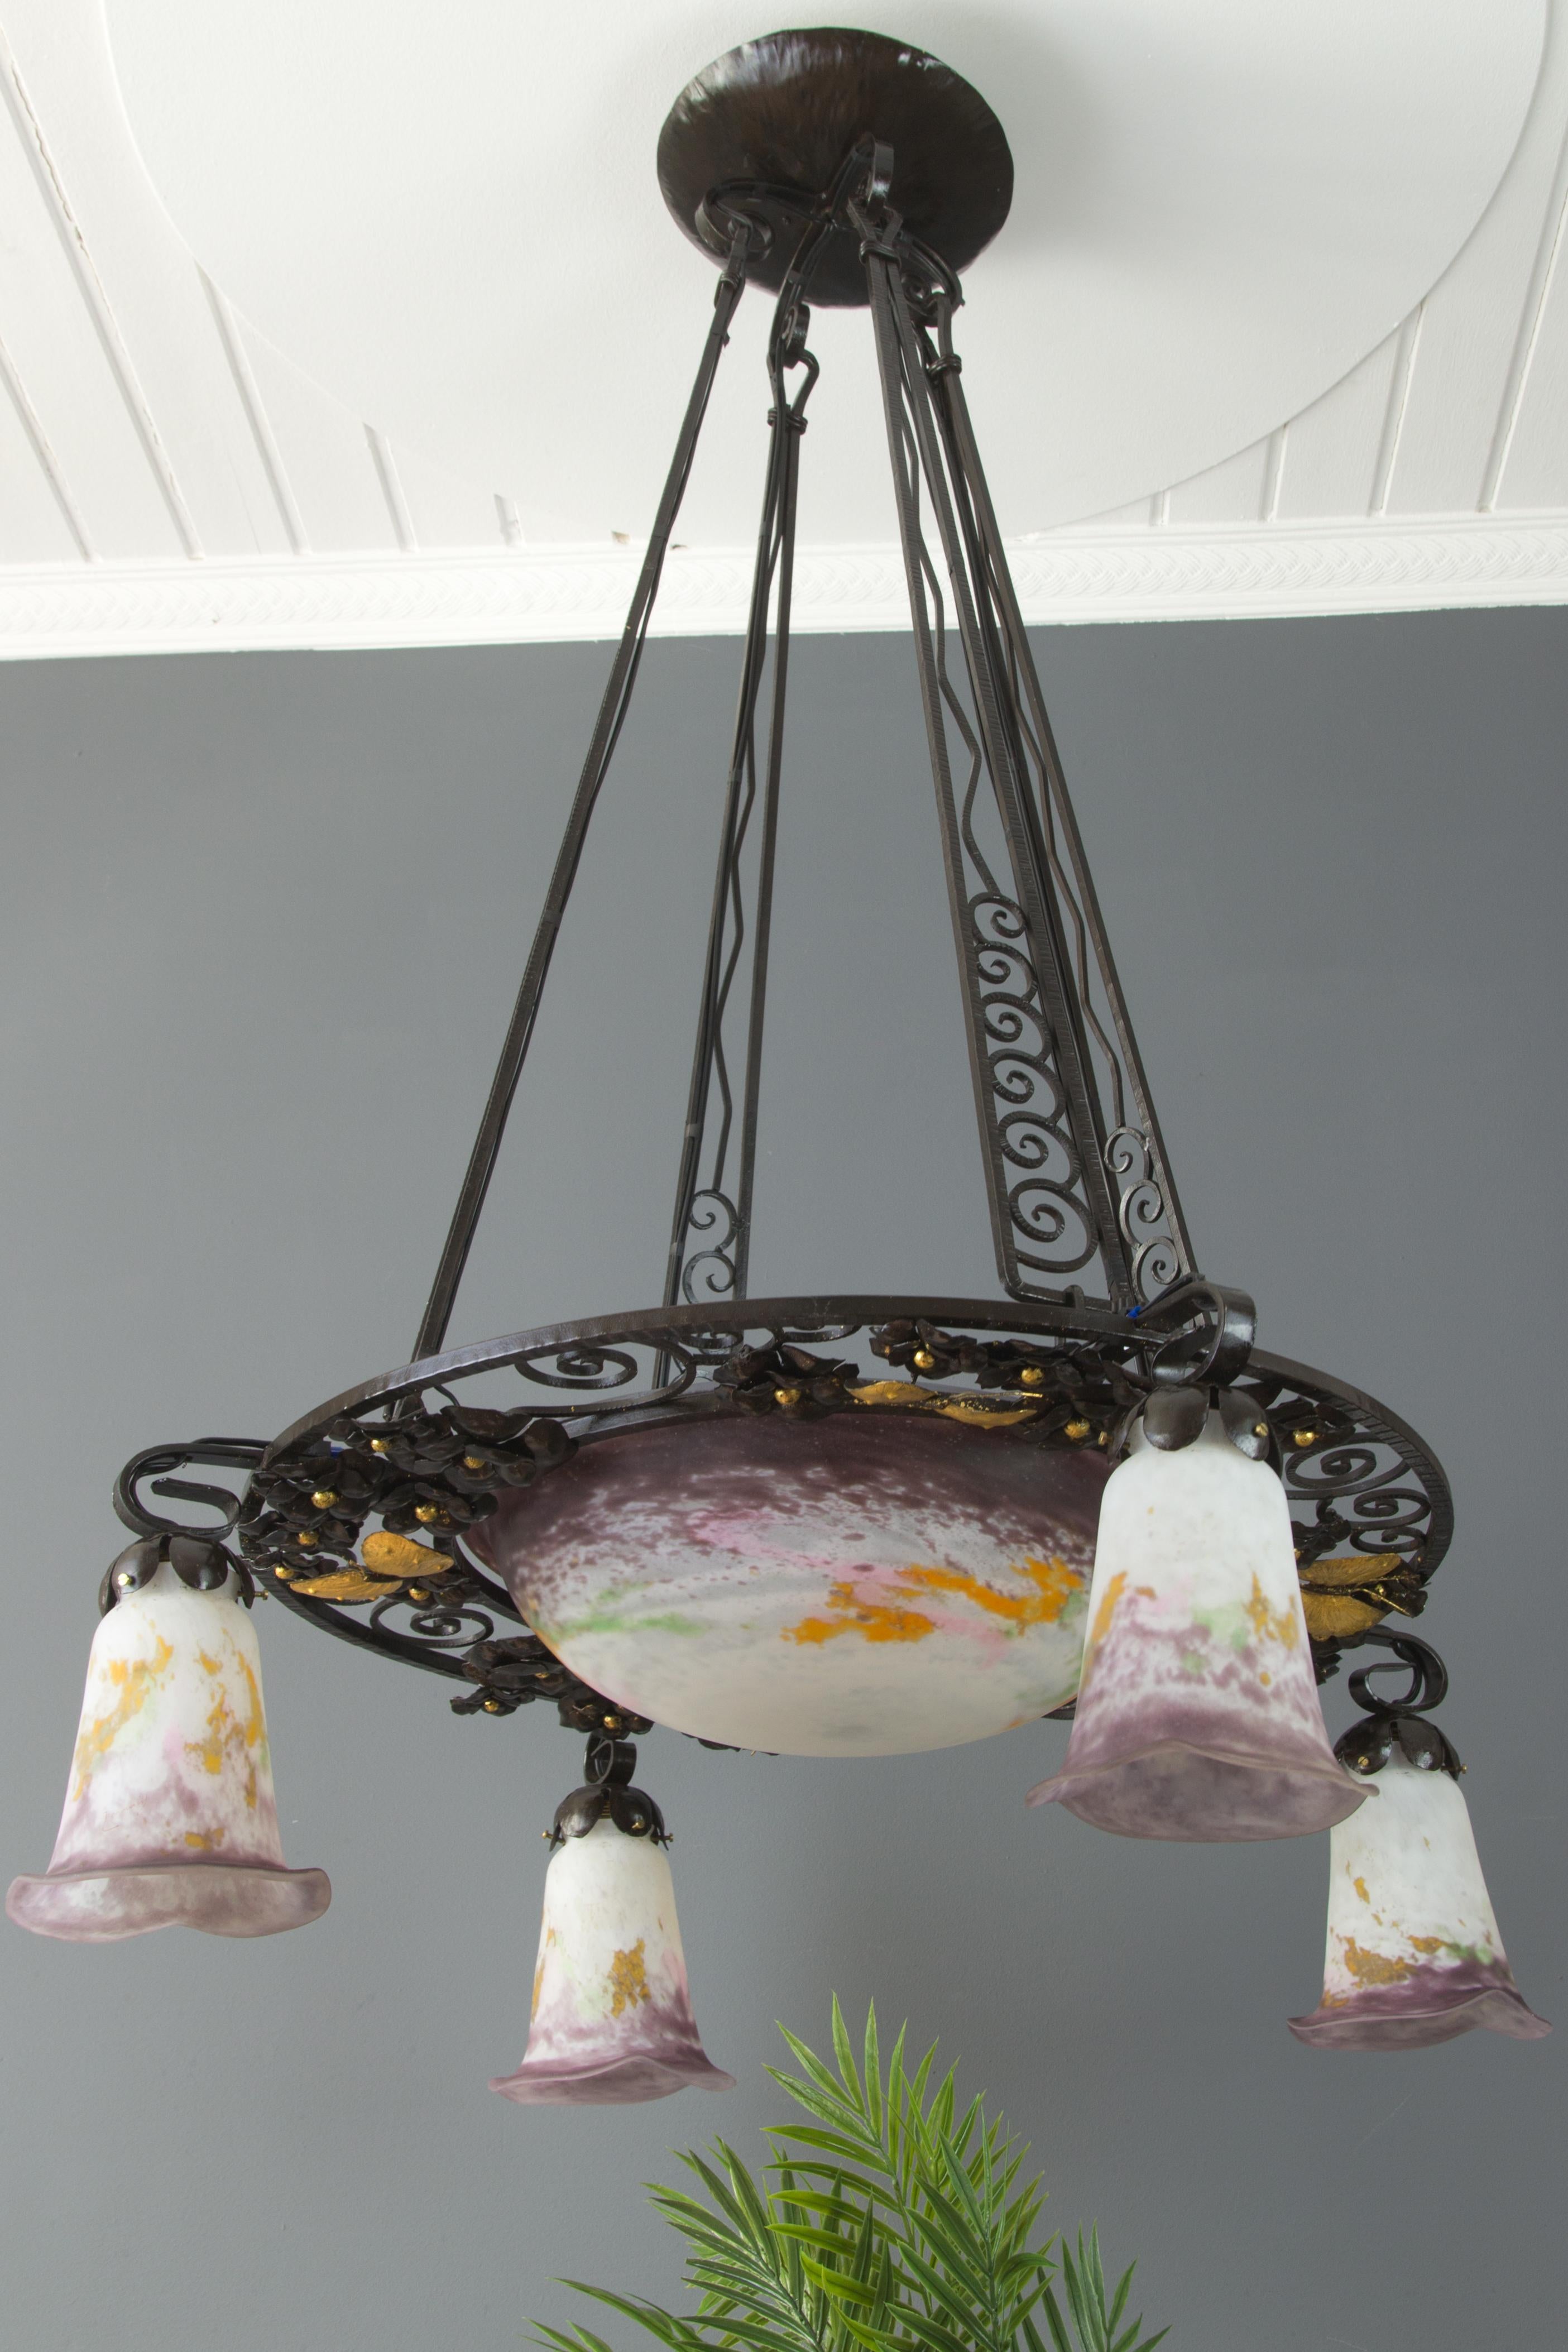 Early 20th Century French Art Nouveau Five-Light Wrought Iron and Glass Chandelier Signed Lorrain